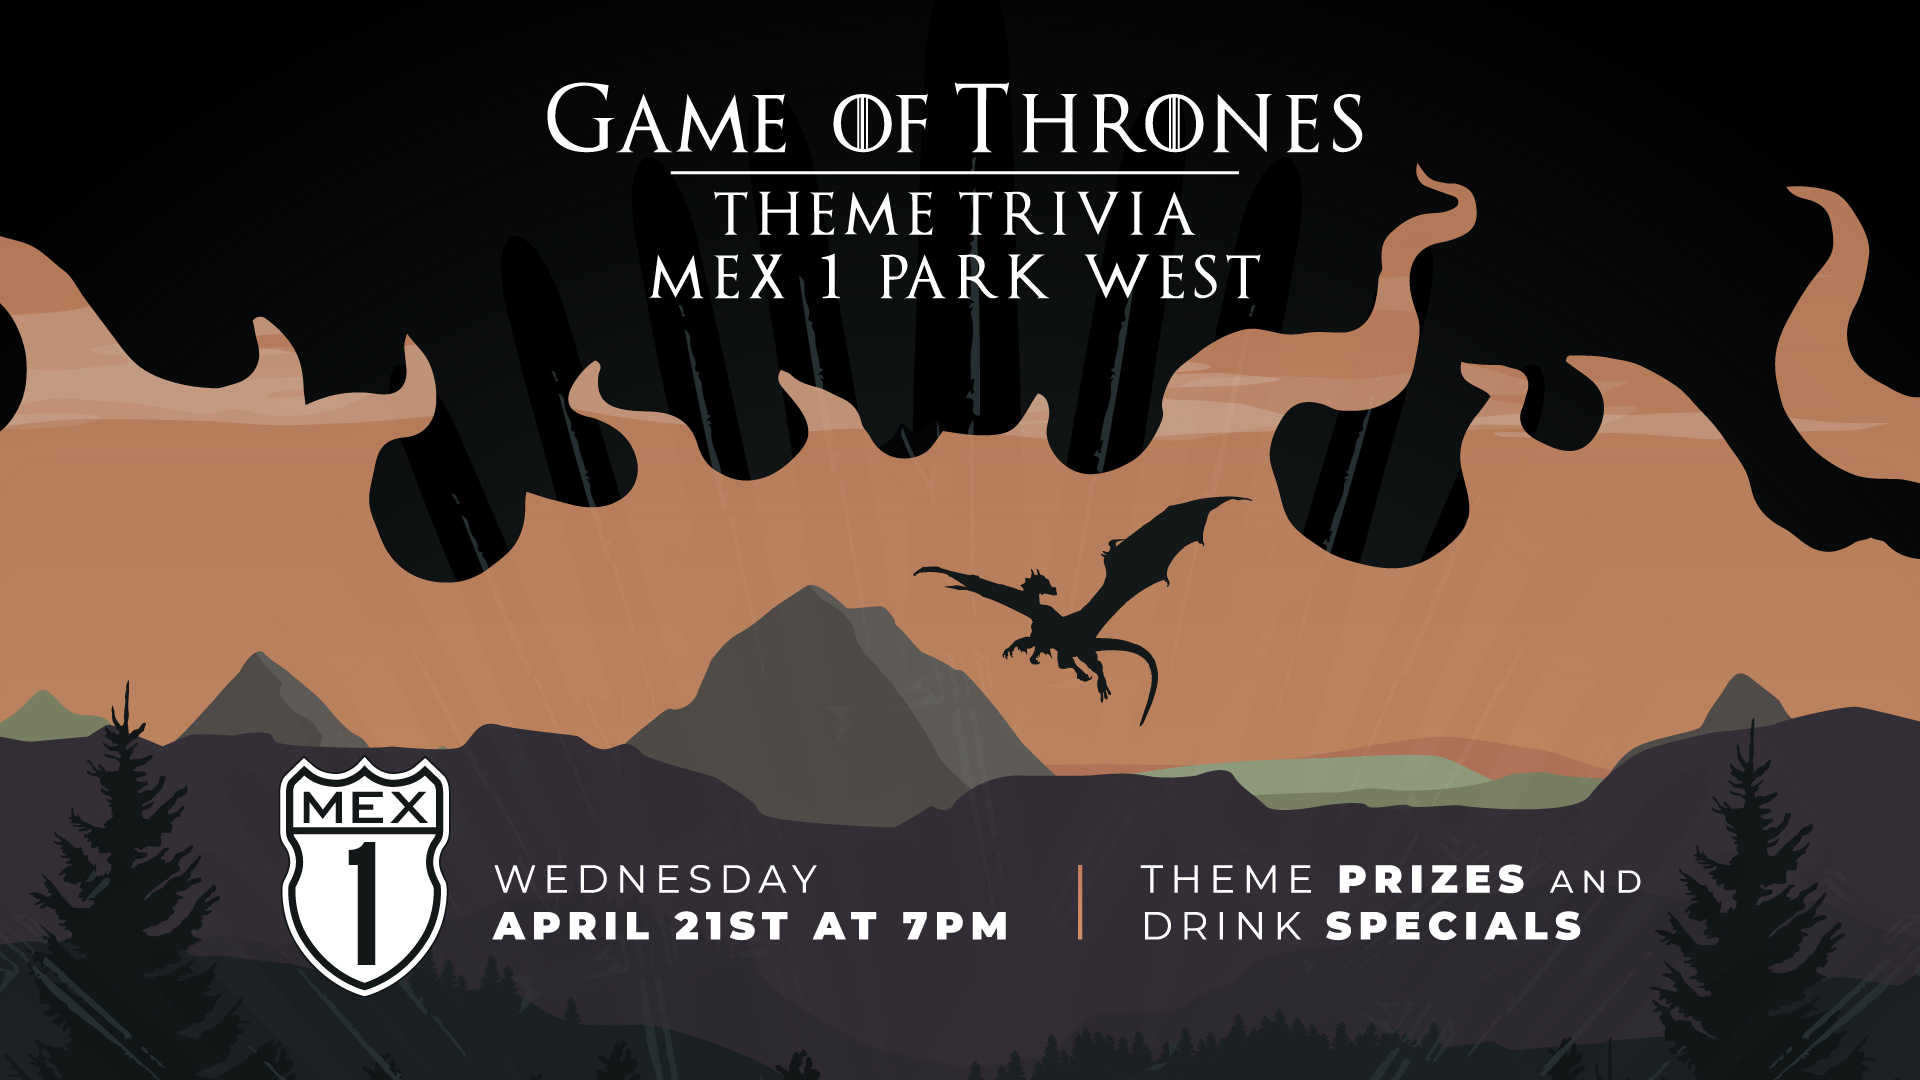 Game of Thrones Theme Trivia at Mex 1 Park West on Wednesday, April 21st